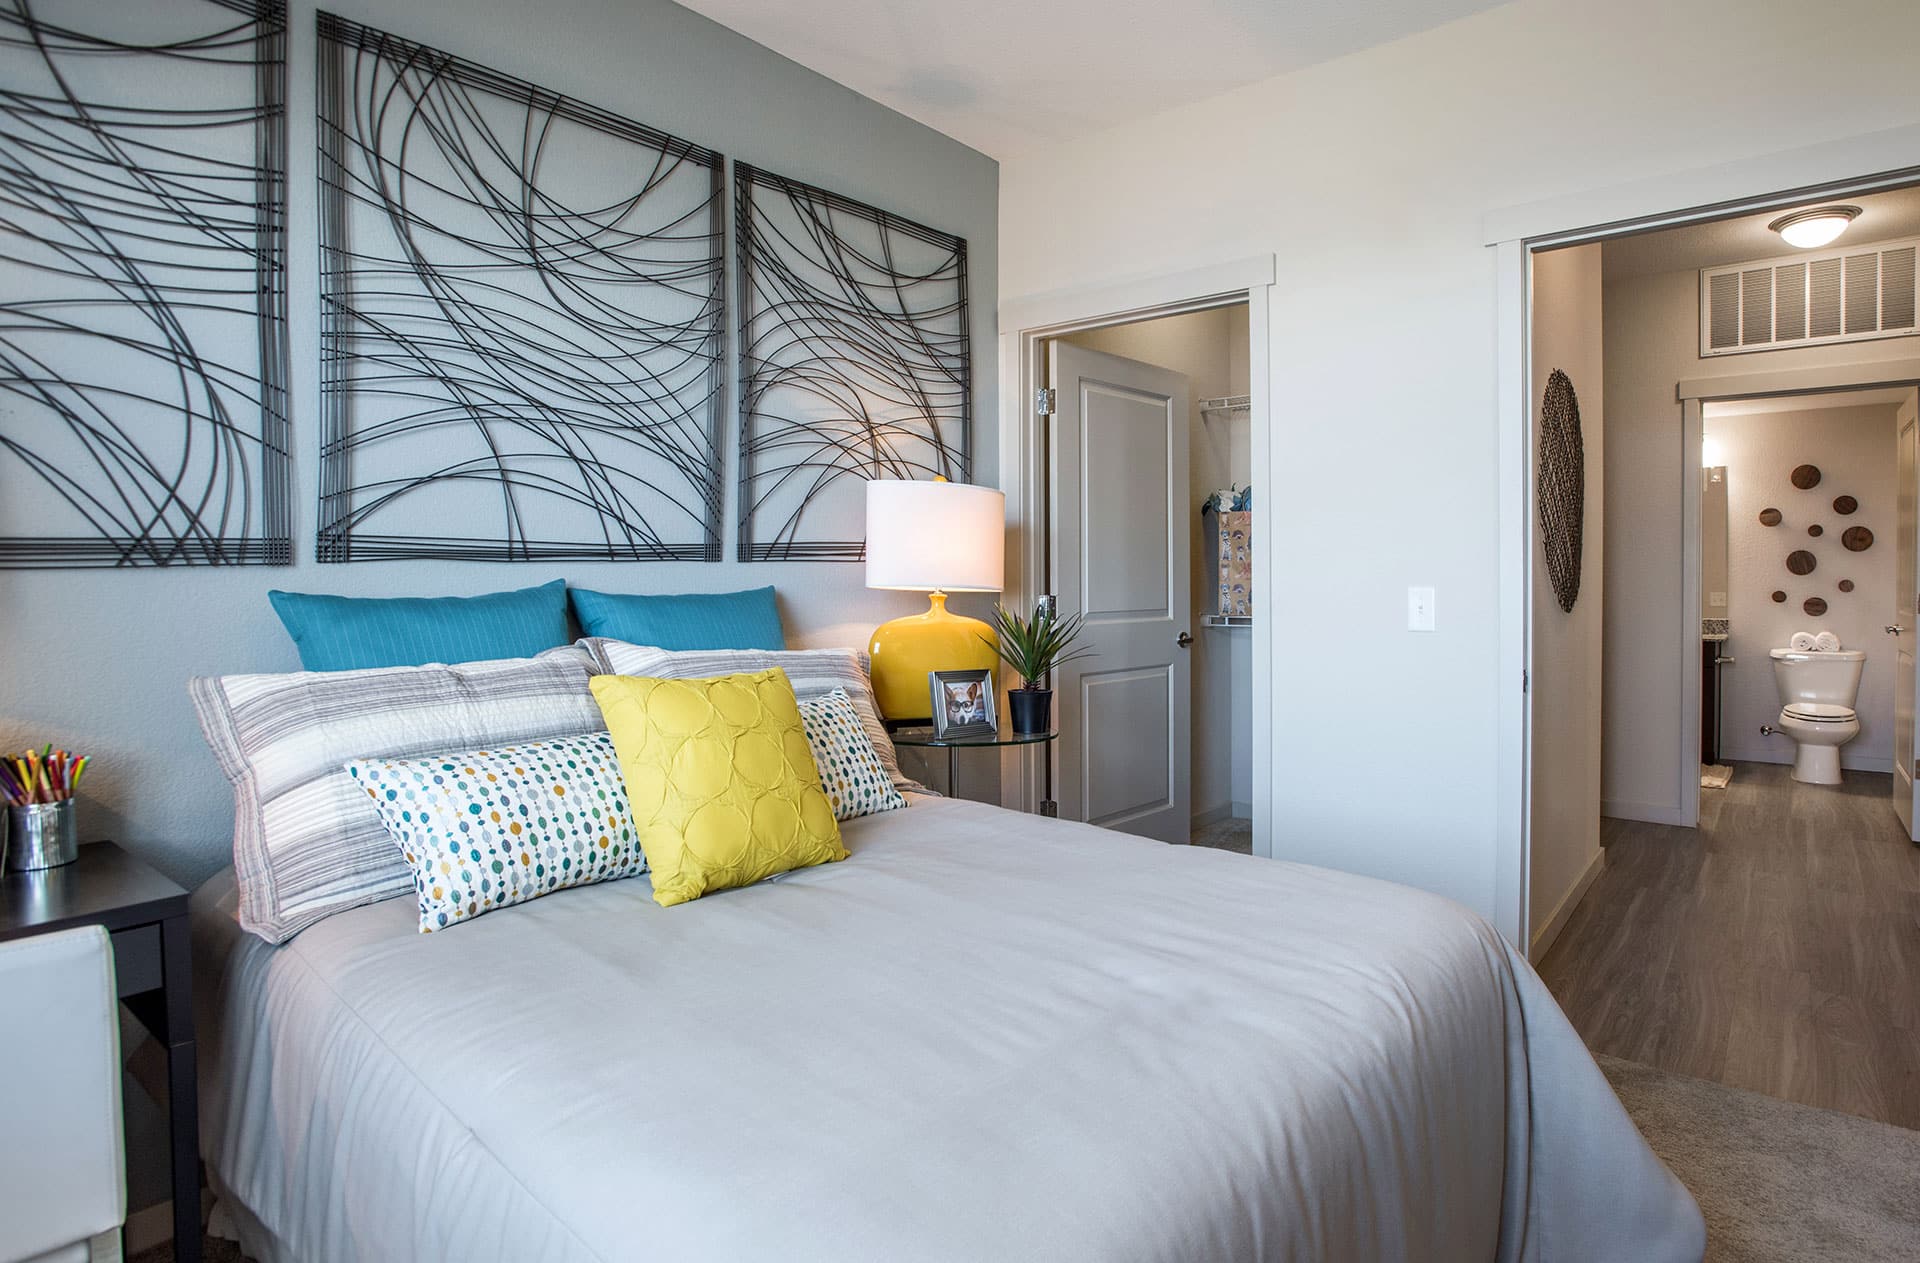 Bedroom with gray bedding, teal and yellow accent pillows.